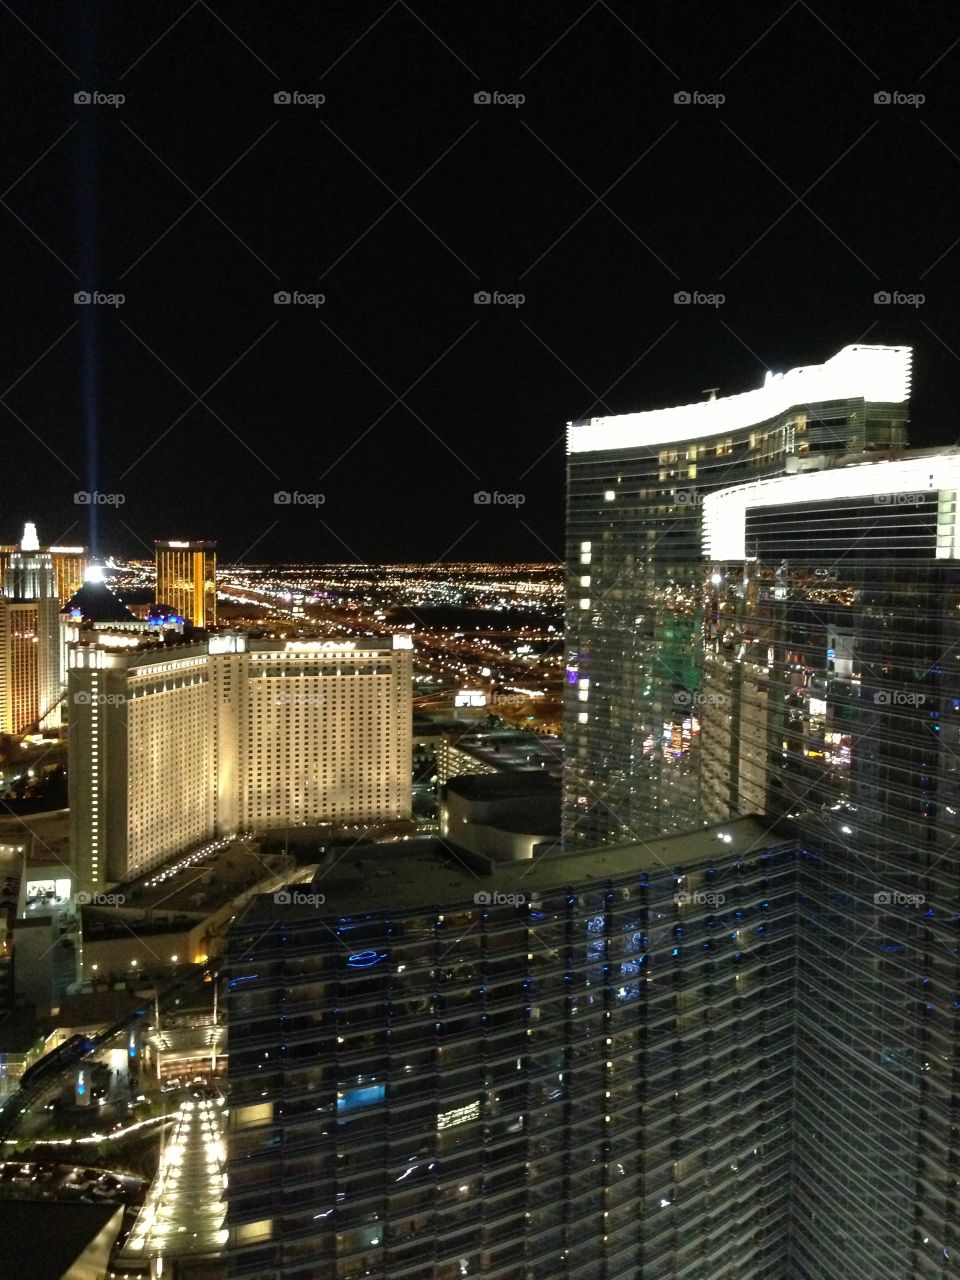 Las Vegas as seen from Cosmo . Aria, beam of light from the Luxor, Mandalay  Bay in background. 